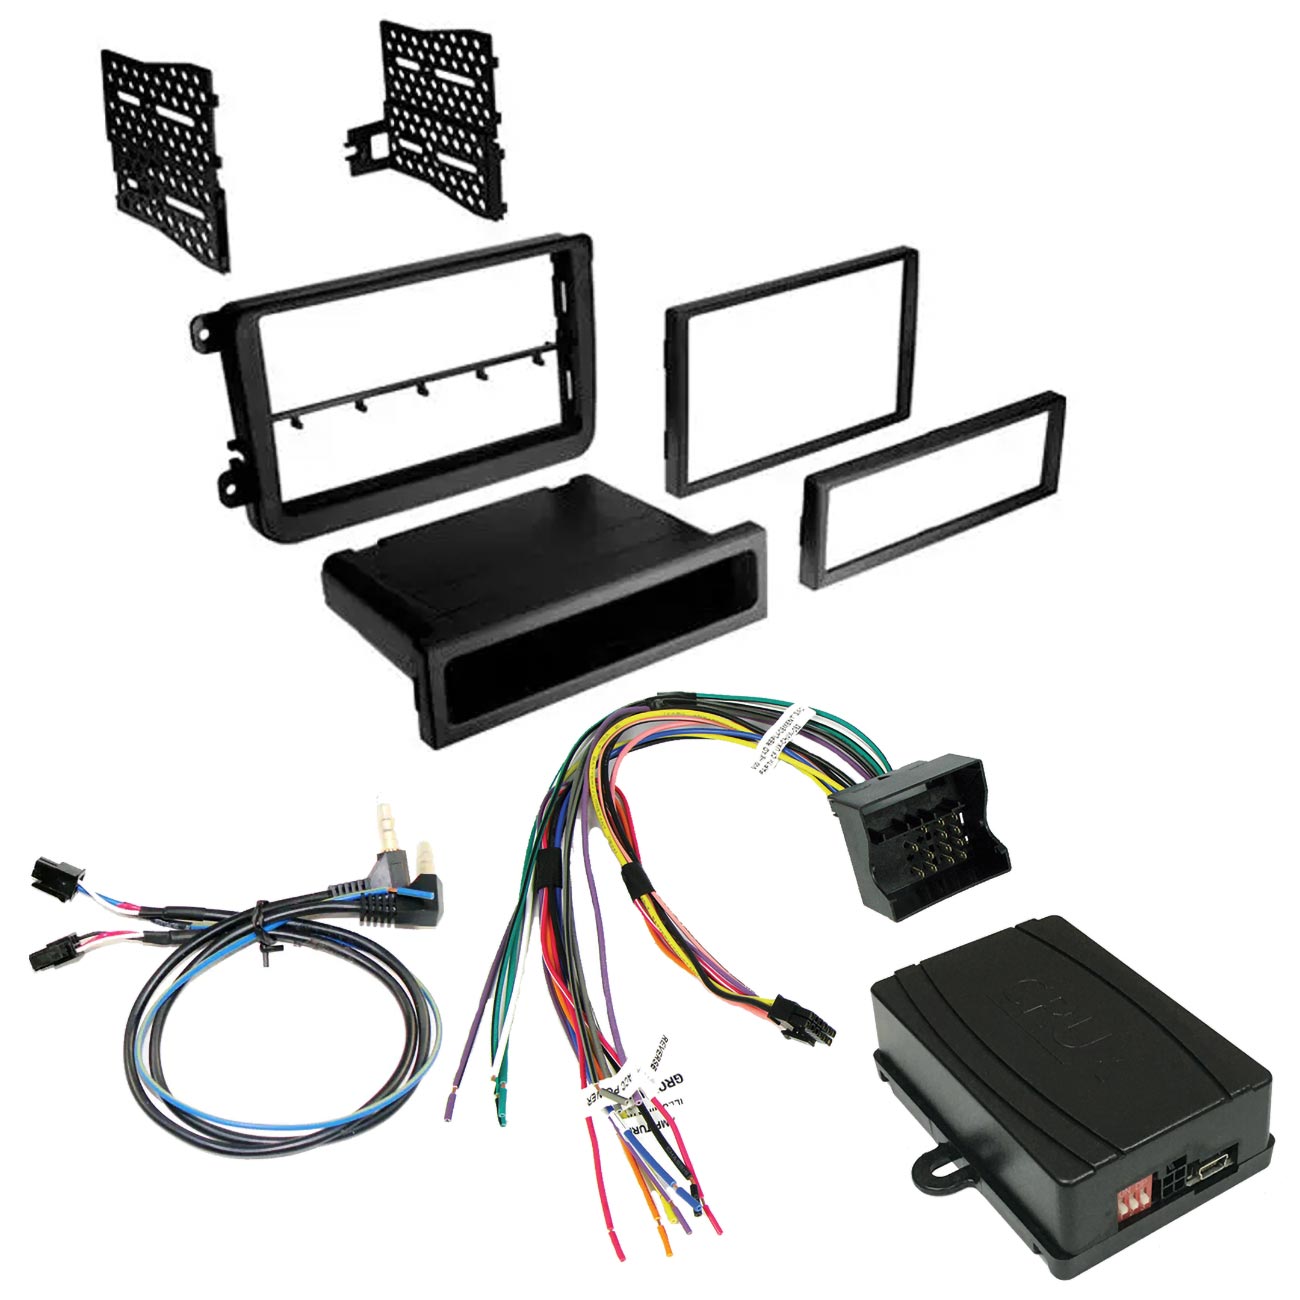 Crux Radio Replacement with Steering Wheel Control Retention and Dash Kit for Select VW Vehicles